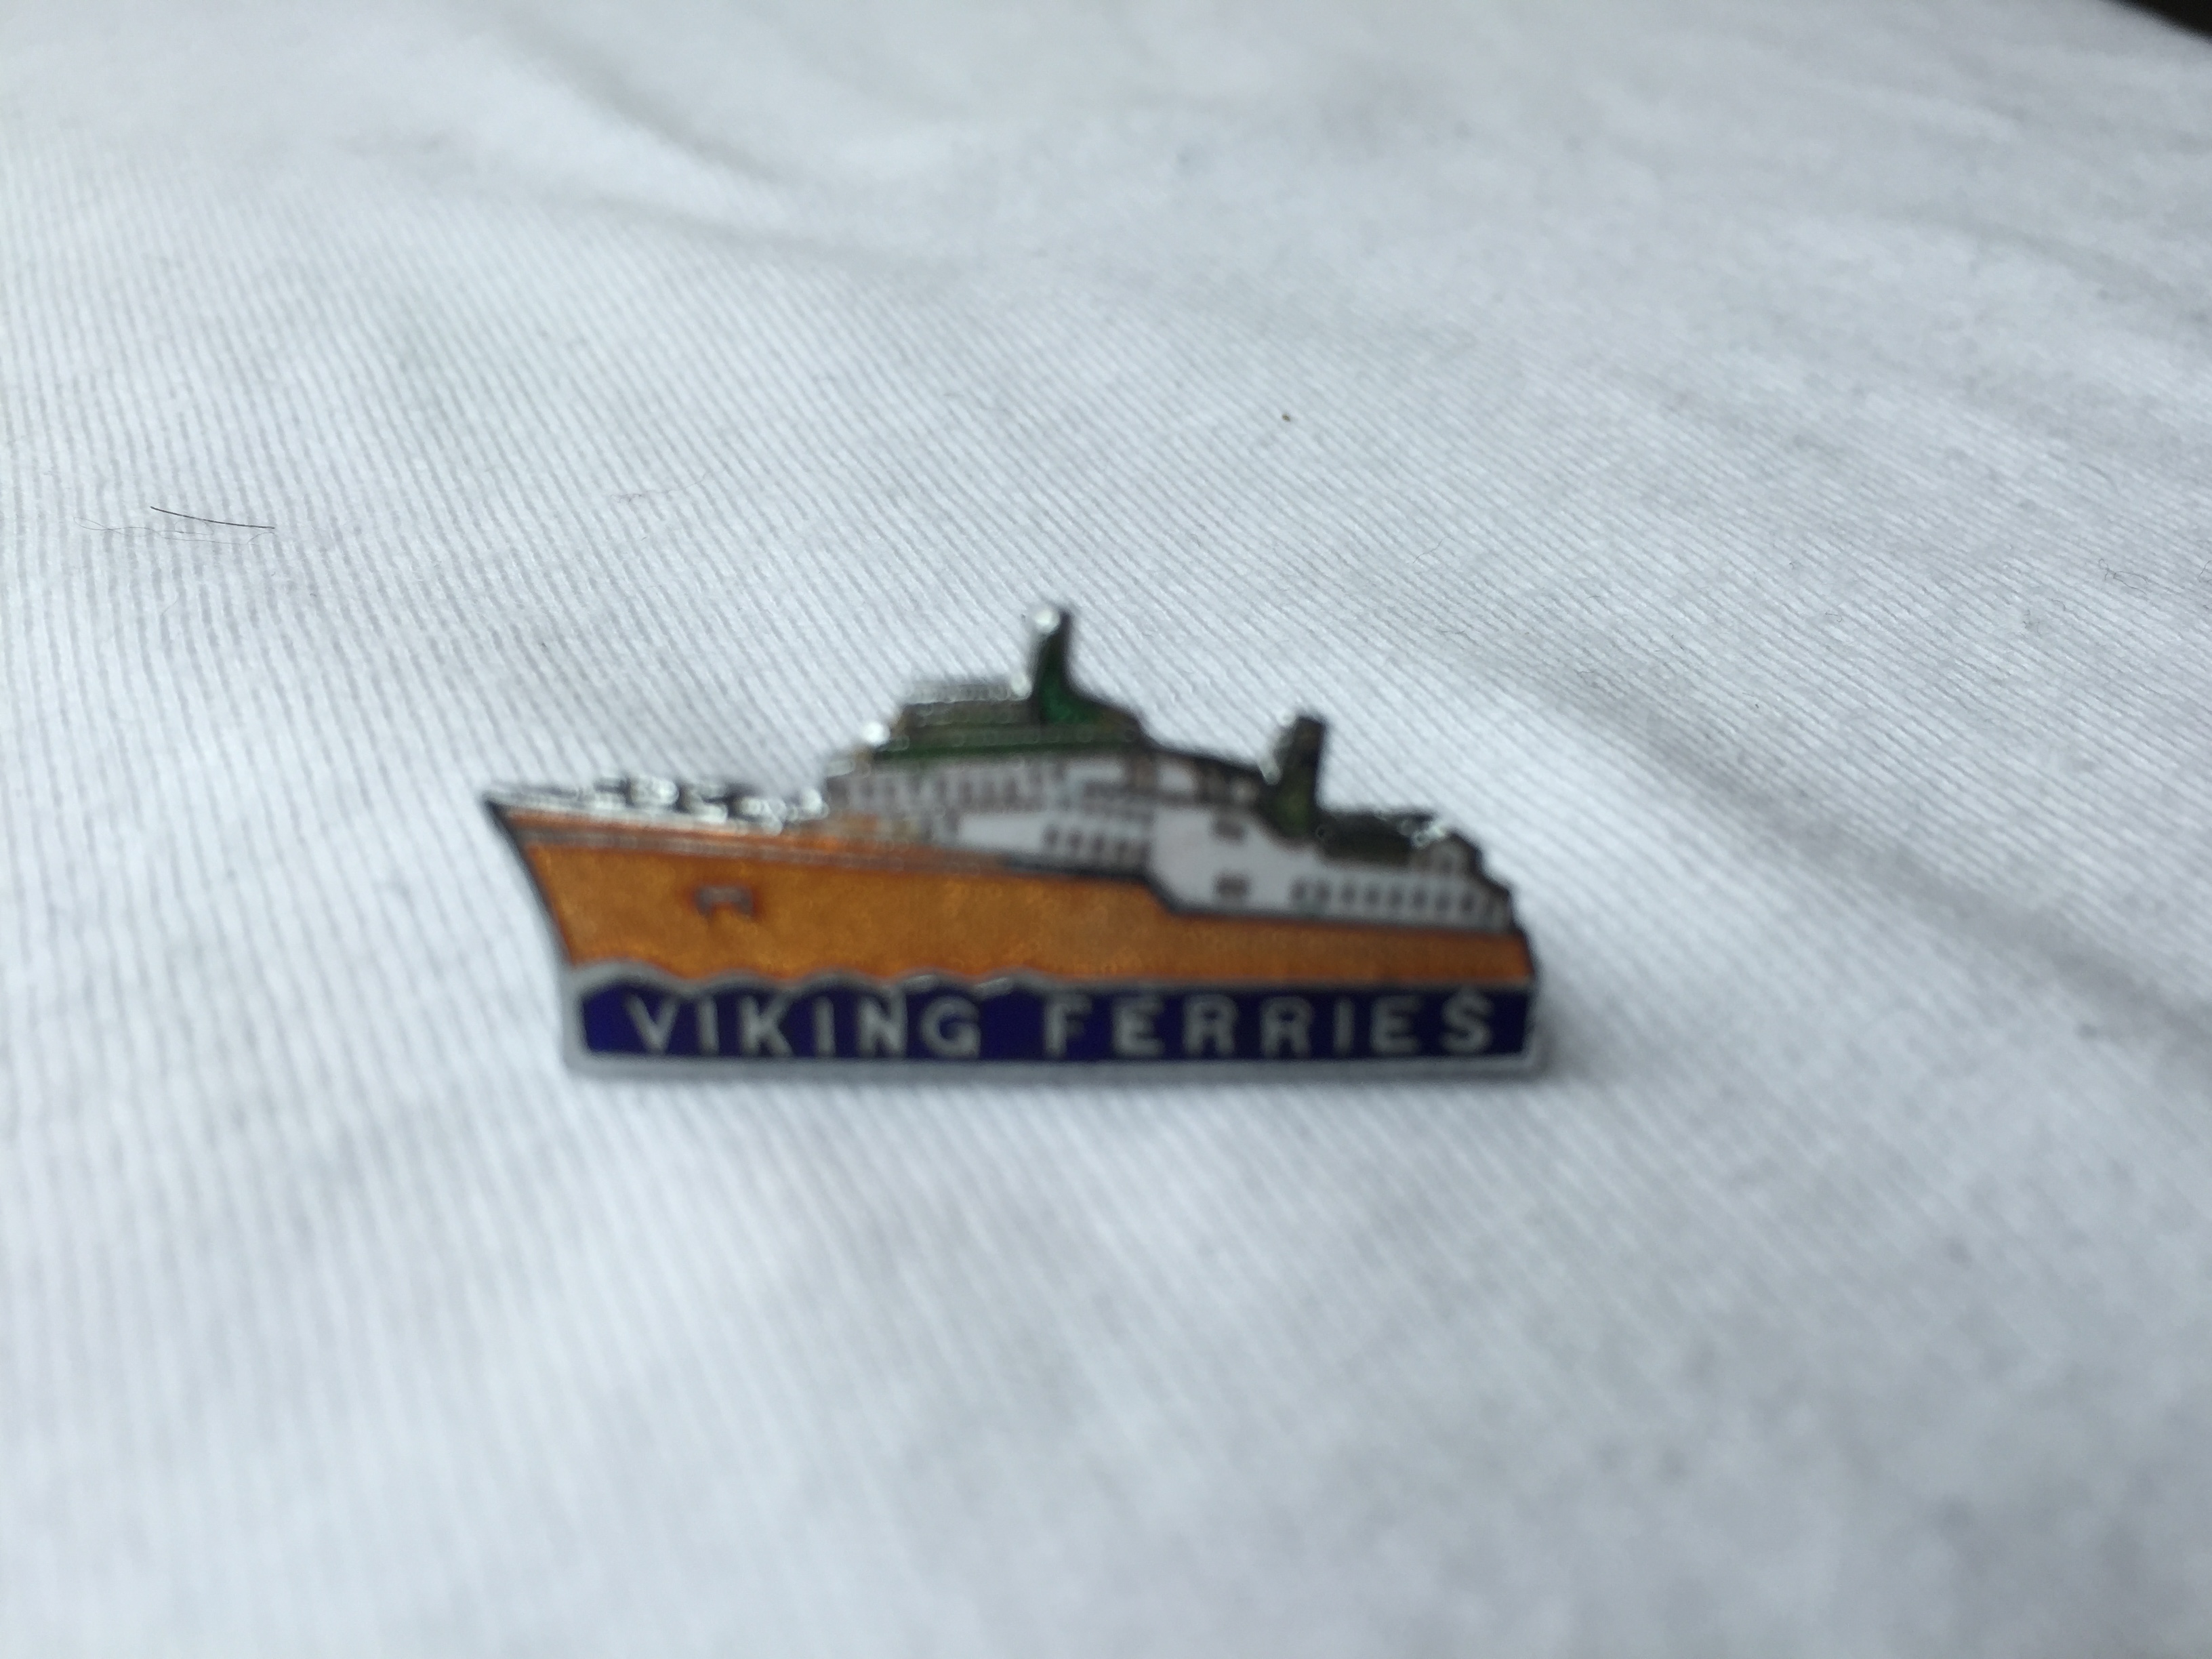 SHIP SHAPE LAPEL PIN FROM THE VIKING FERRY CROSSING COMPANY